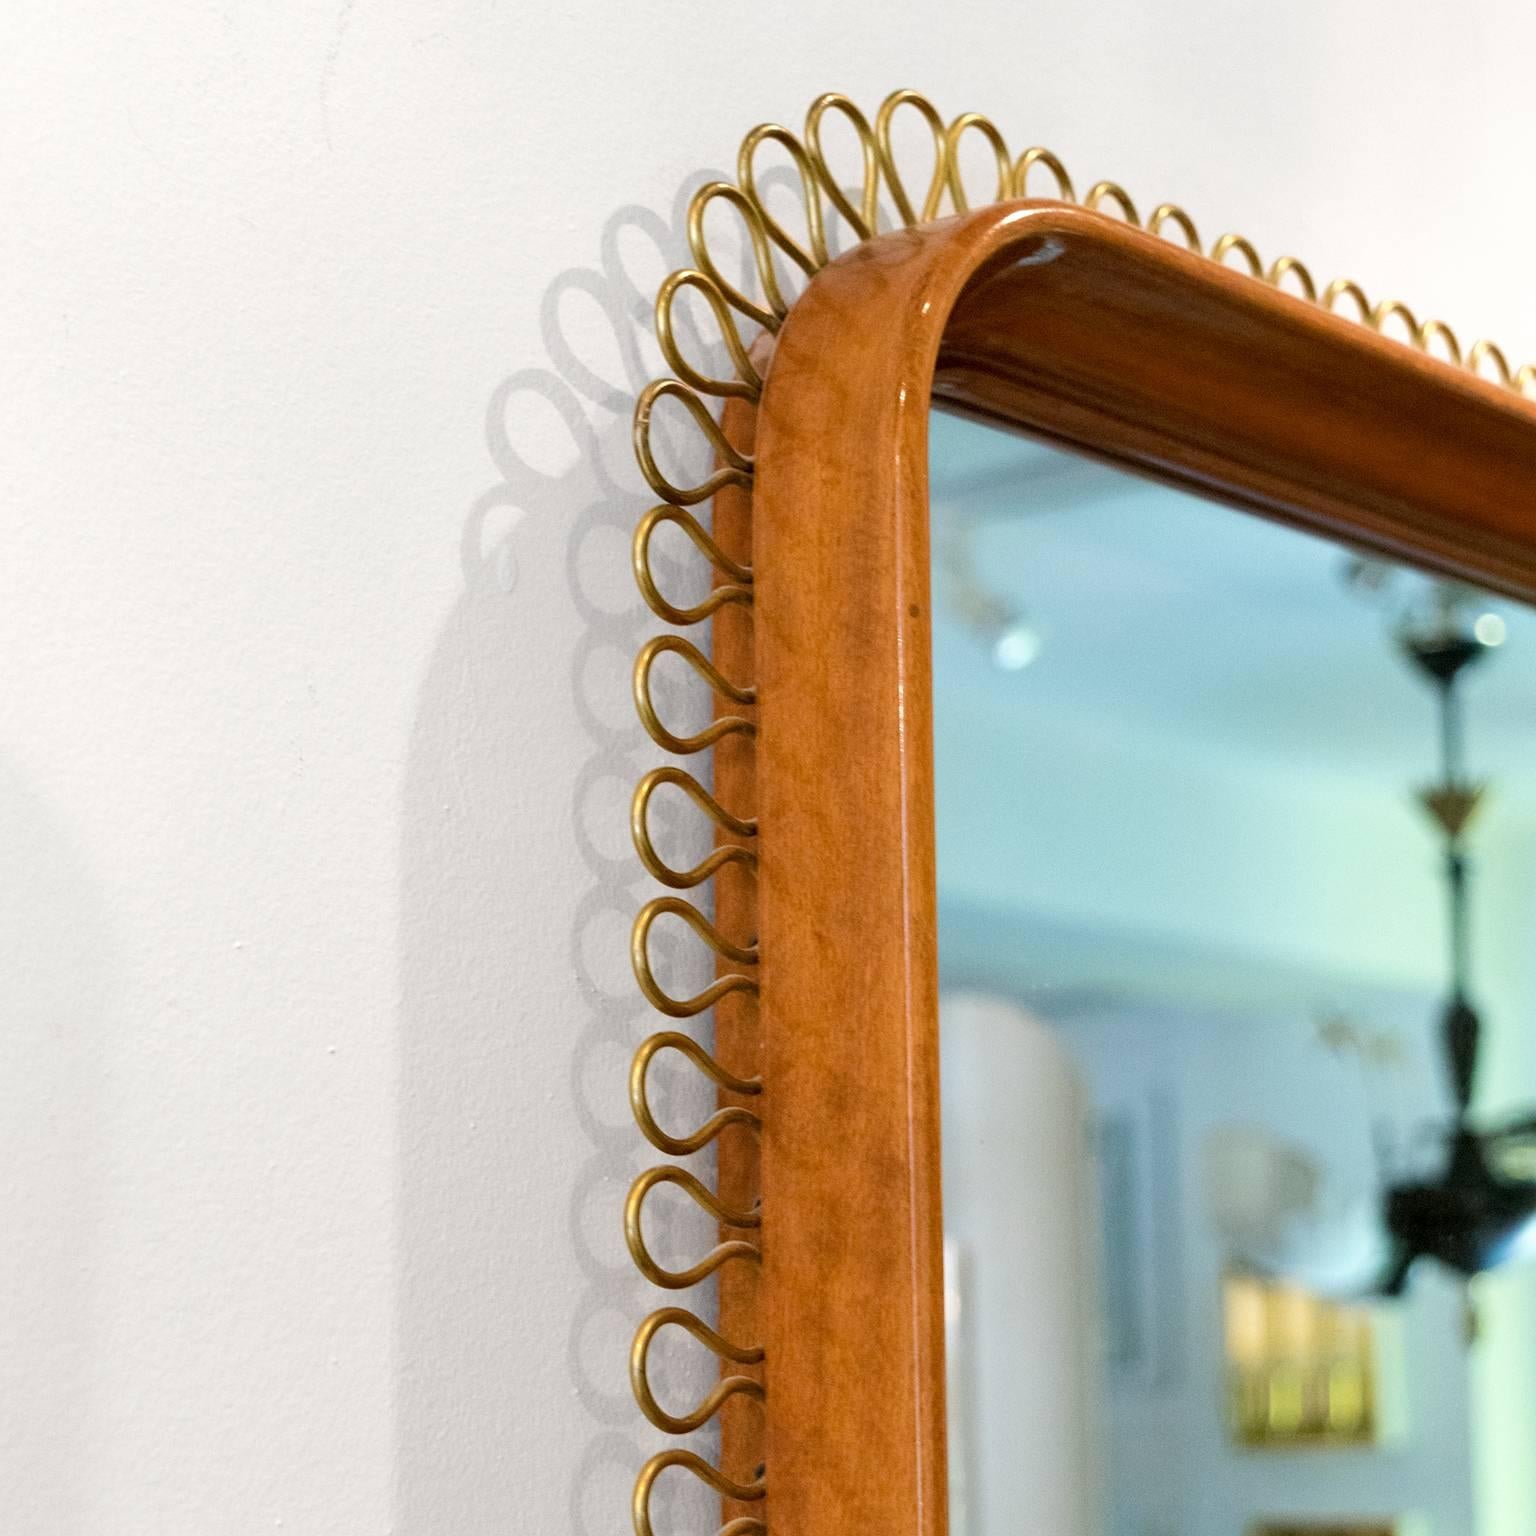 Scandinavian Modern solid mahogany mirror with rounded corners and decorated with an exterior bent brass border. Made by NK (Nordiska Kompaniet) Stockholm, Sweden.
 
Measures: Height 31.5